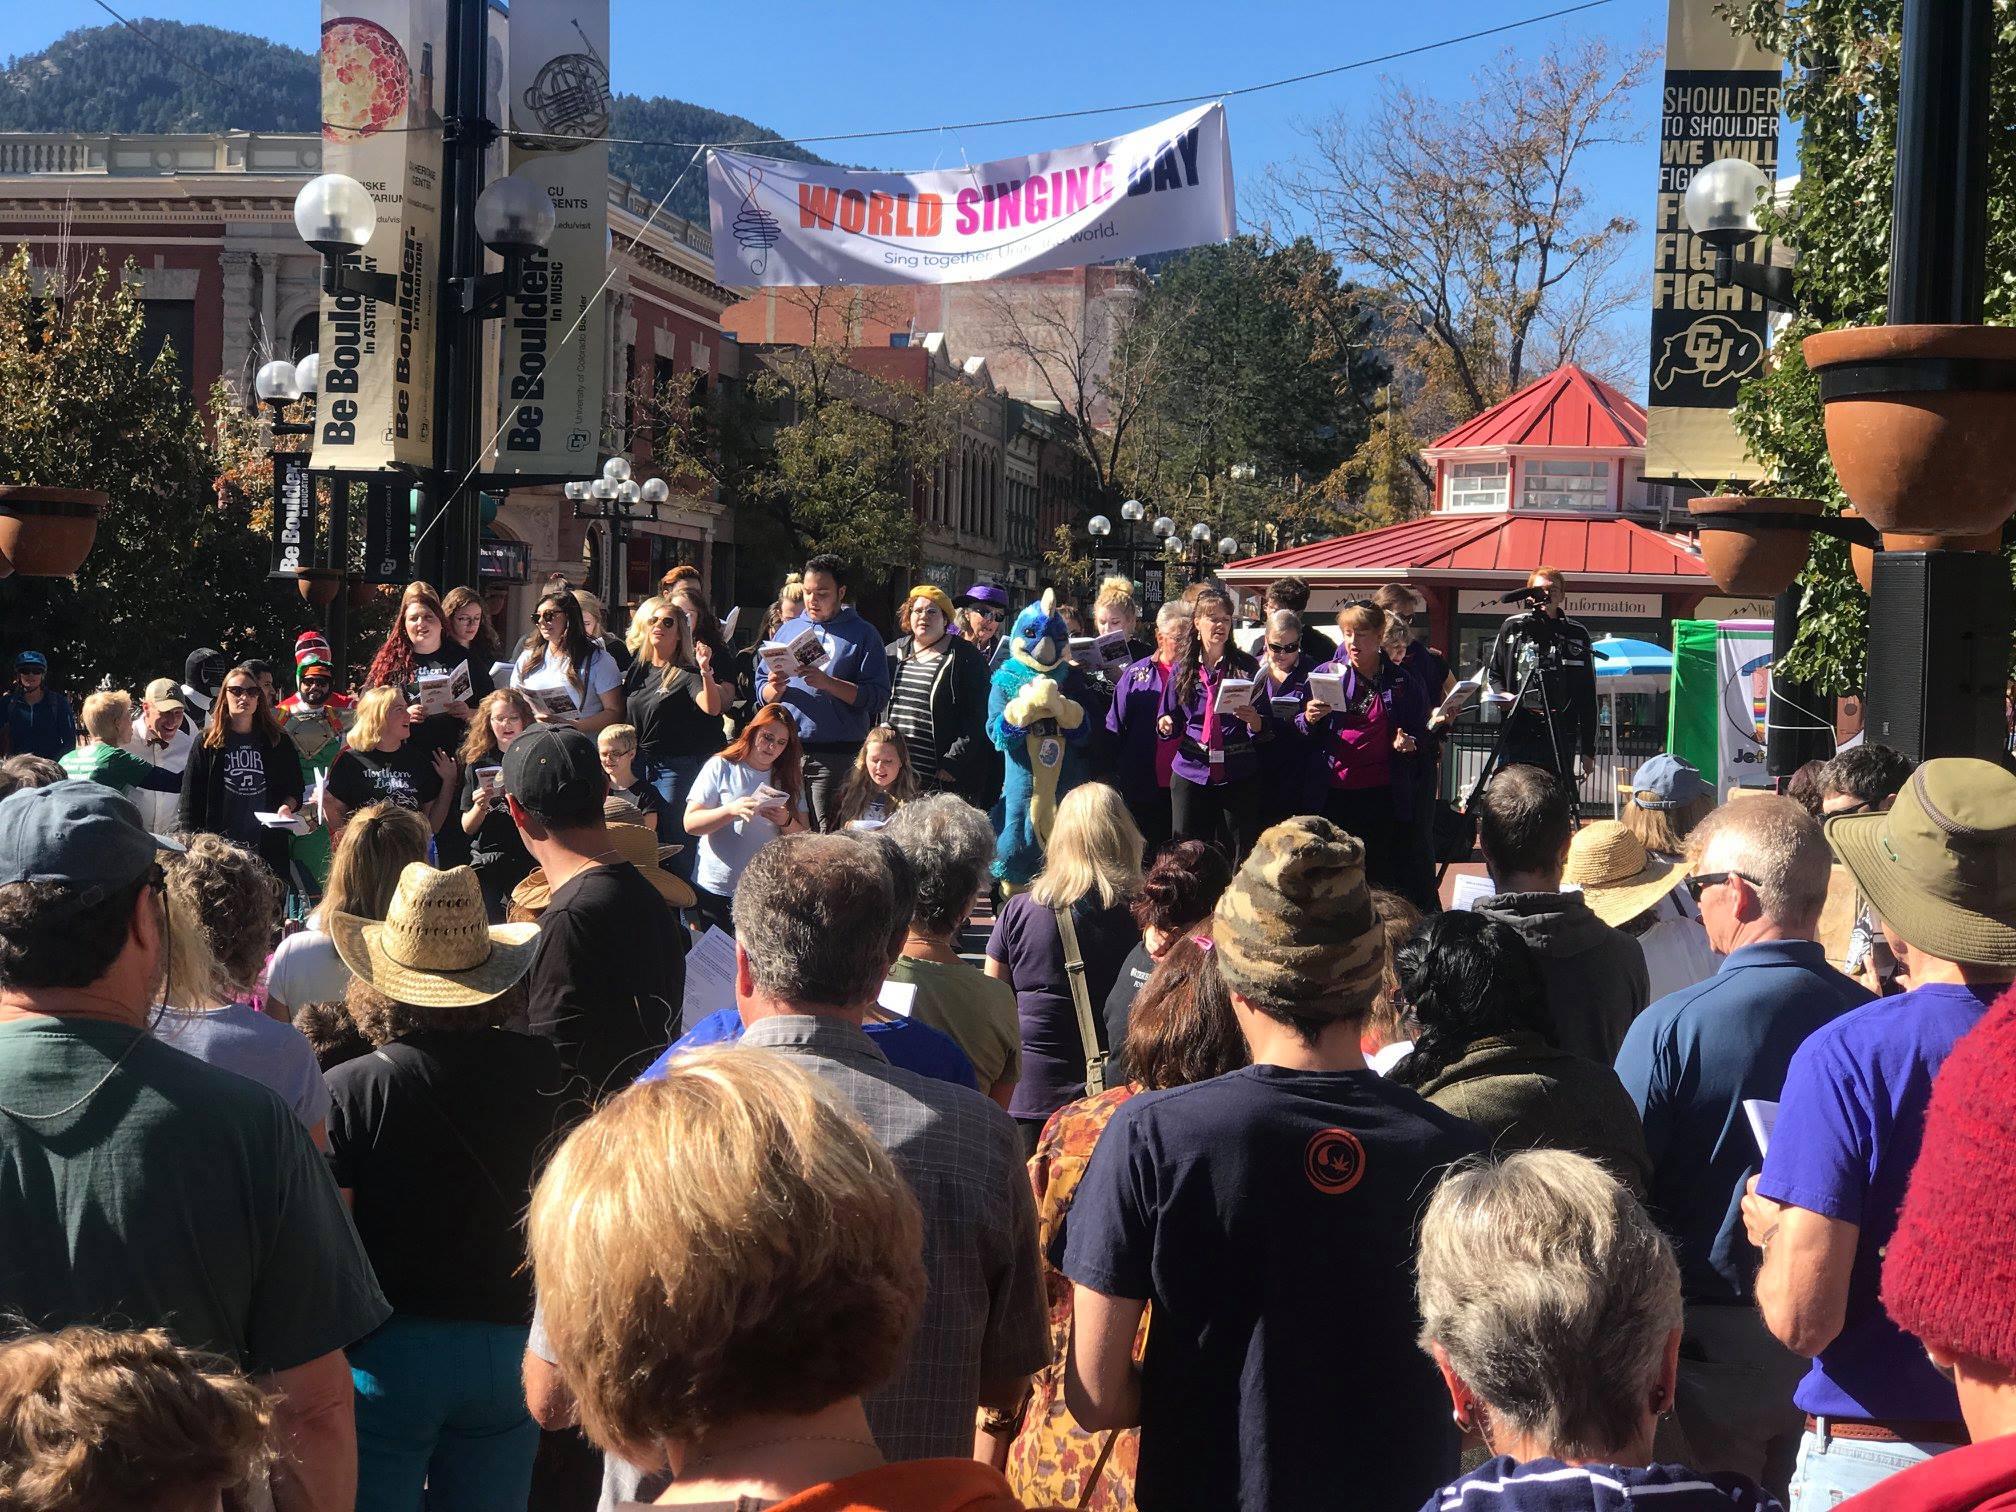 Colorado Spirit Chorus participates in World Singing Day in downtown Boulder, CO